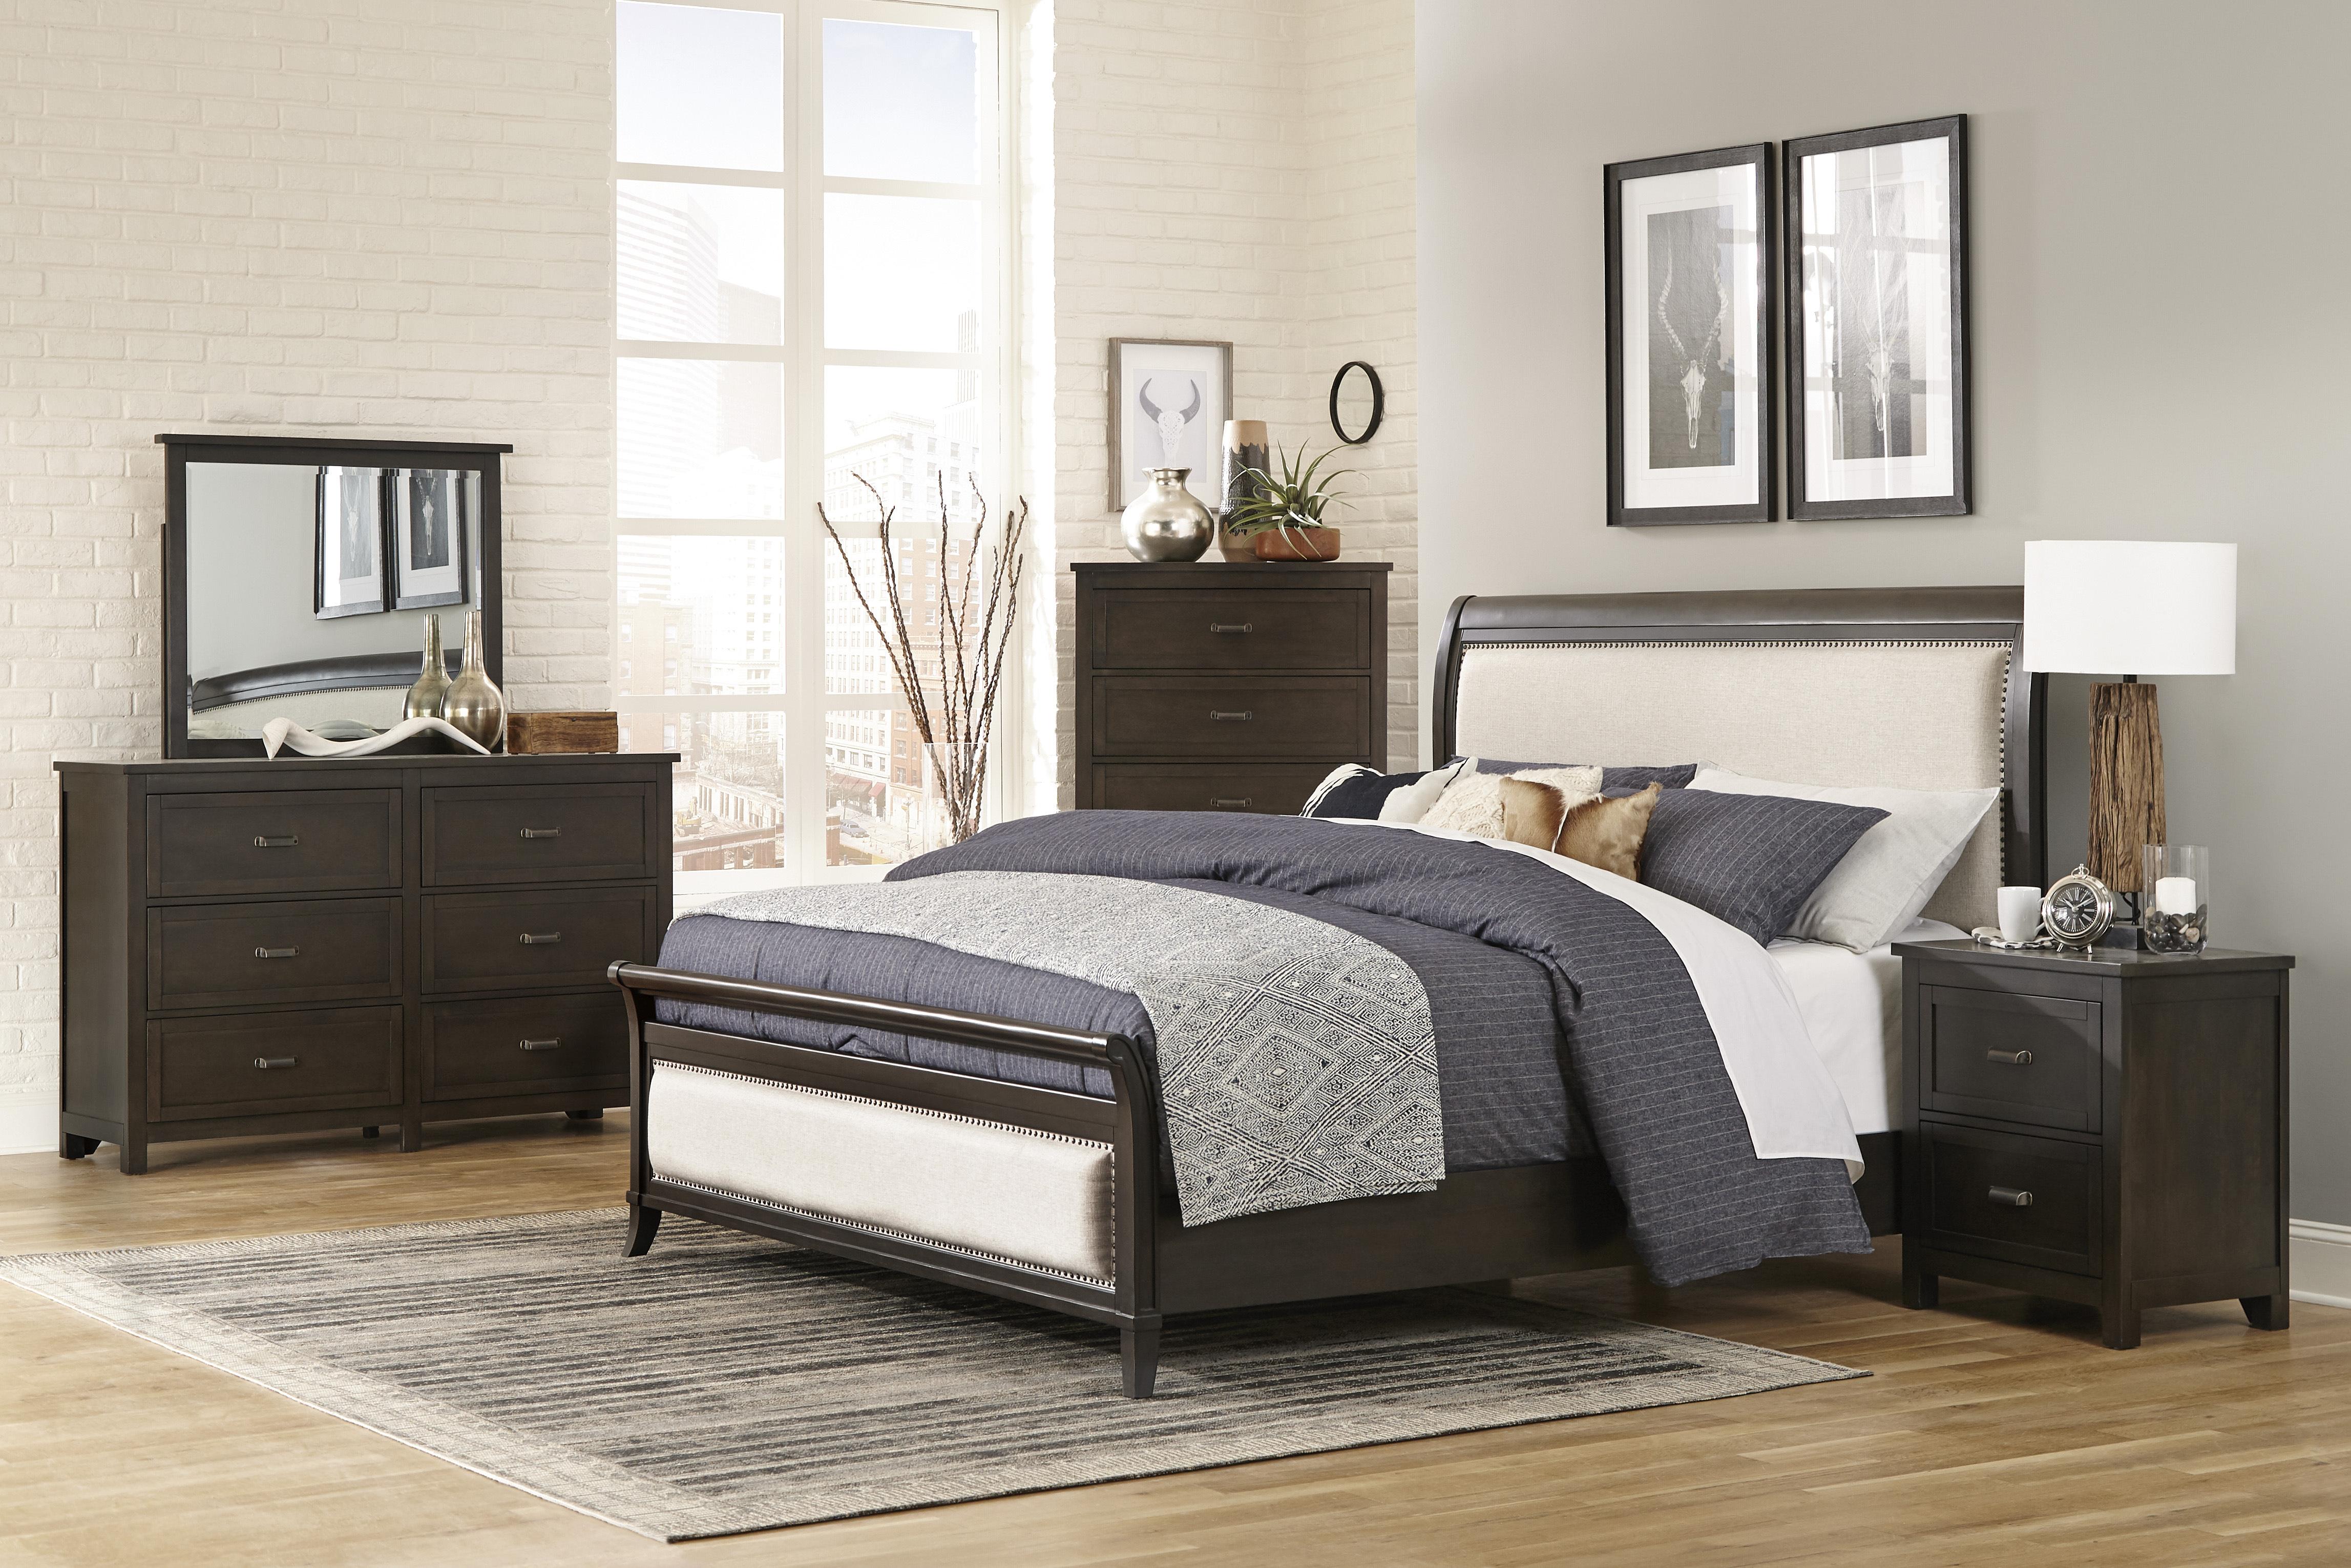 Transitional Bedroom Set 1923NB-1-6PC Hebron 1923NB-1-6PC in Dark Cherry Polyester